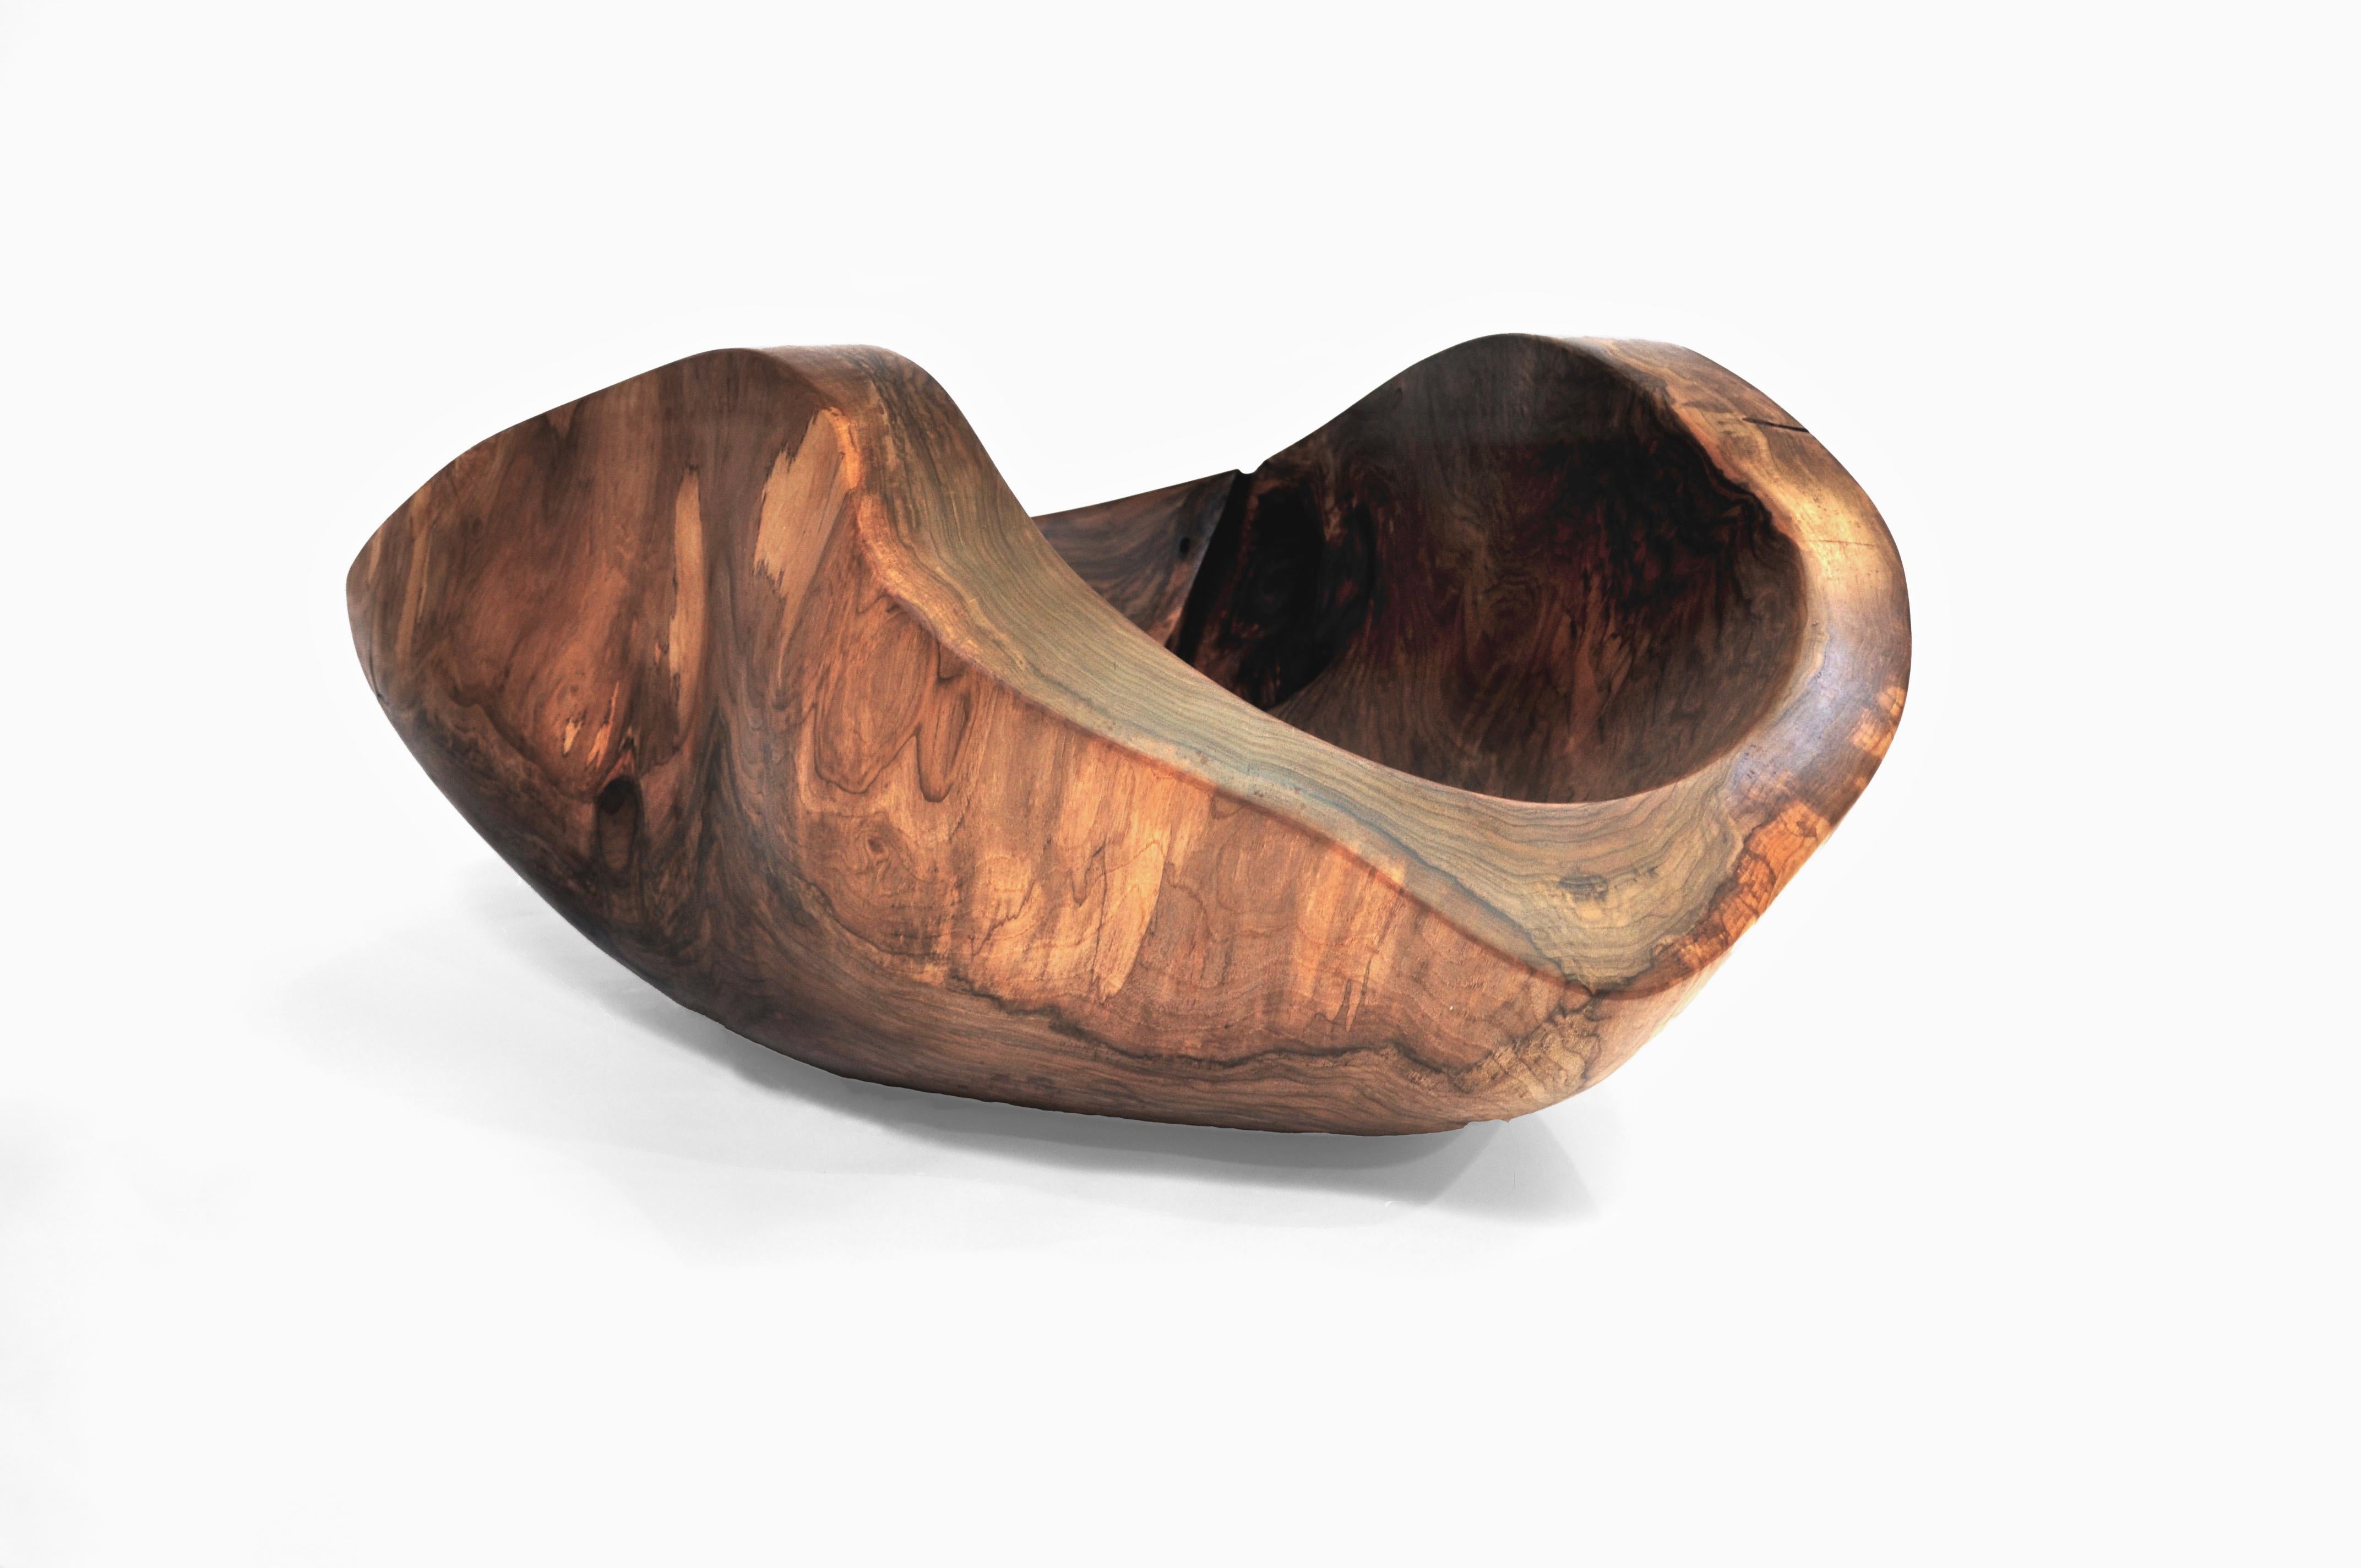 Vessel 1466 by Jörg Pietschmann
Dimensions: D 69 x W 94 x H 44 cm 
Materials: Walnut.
Finish: Polished oil finish.


In Pietschmann’s sculptures, trees that for centuries were part of a landscape and founded in primordial forces tell stories